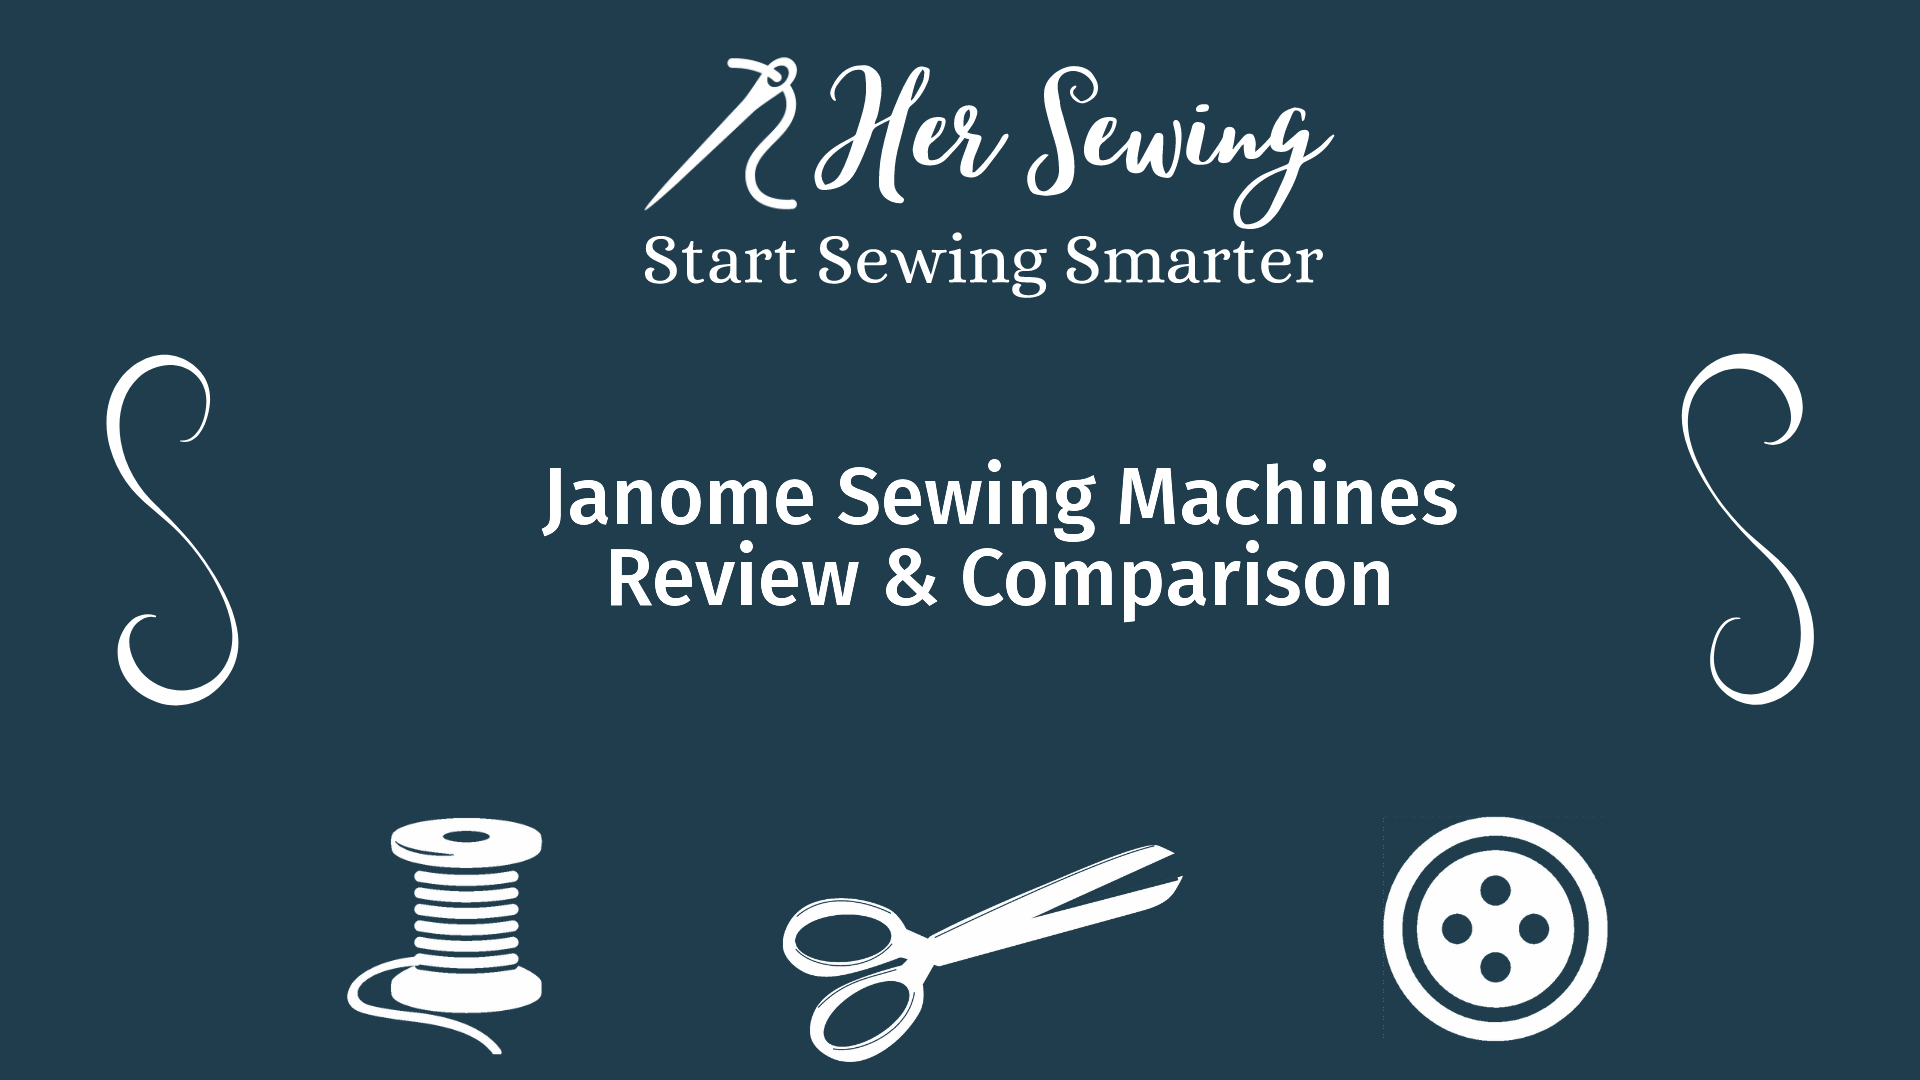 Janome Sewing Machines Review & Comparison